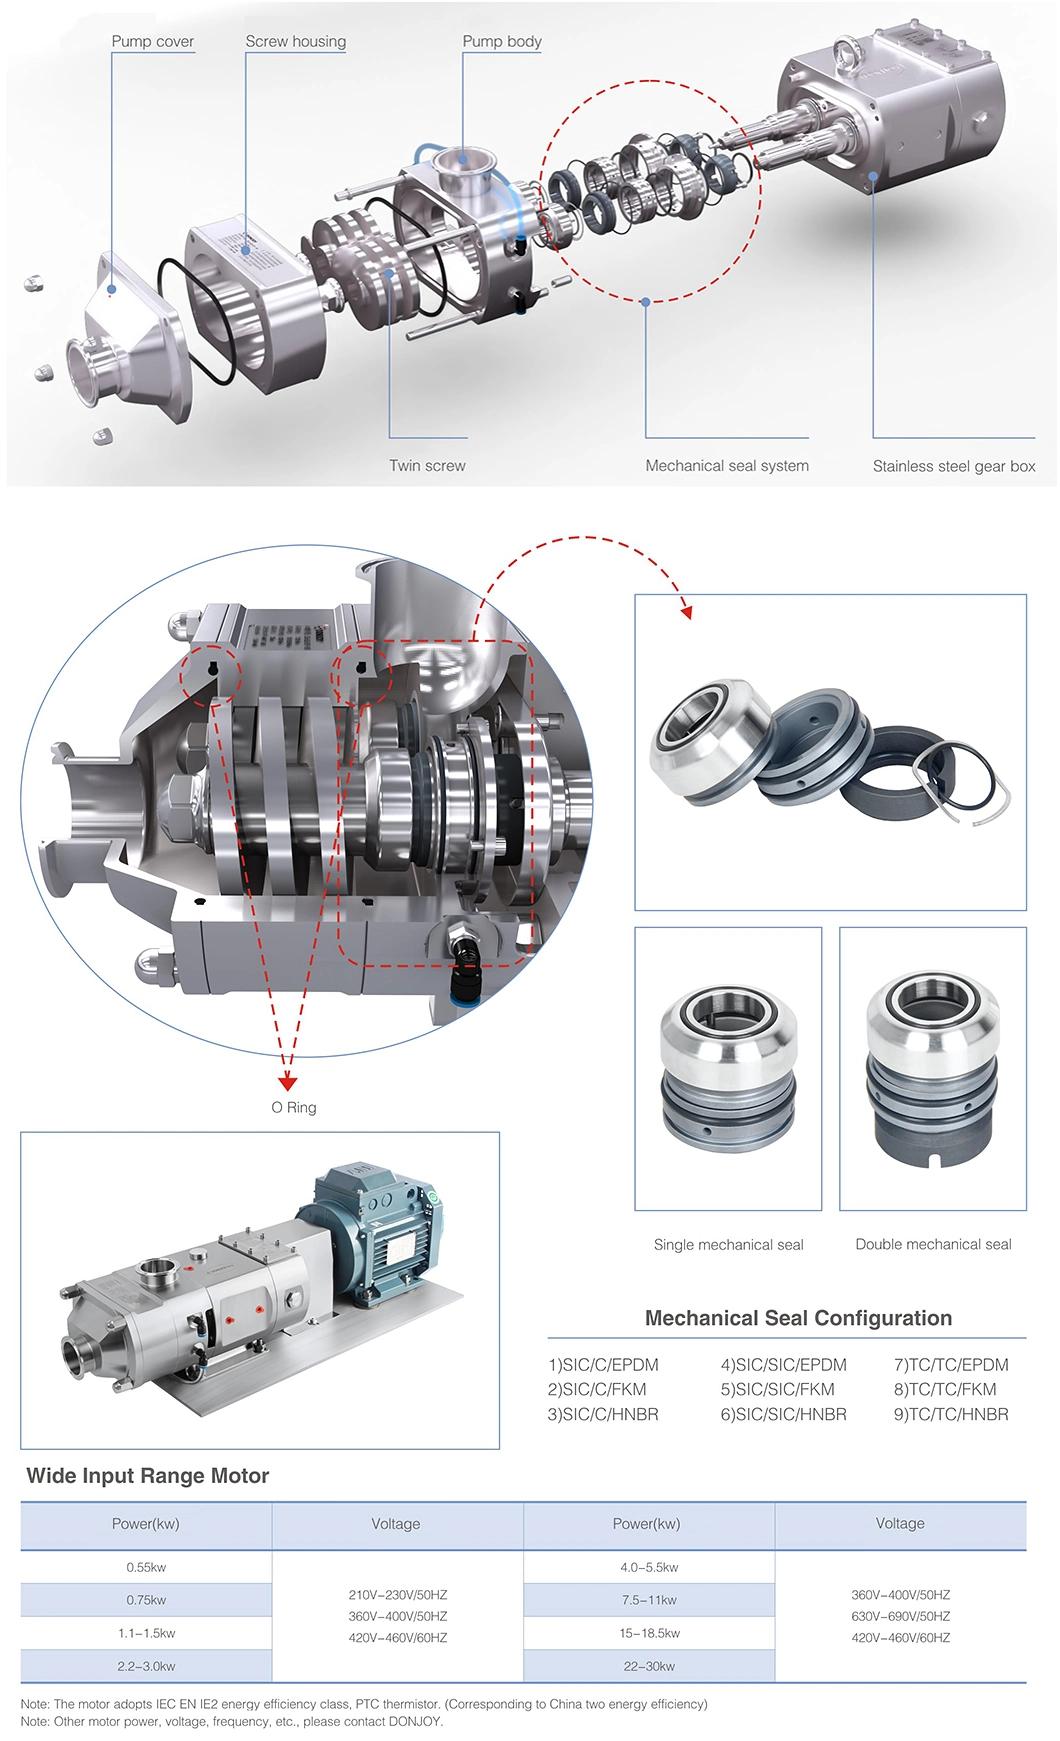 3A Certified Sanitary Twin Screw Pump for Food Beverage Personal Care & Pharmaceutical Industries